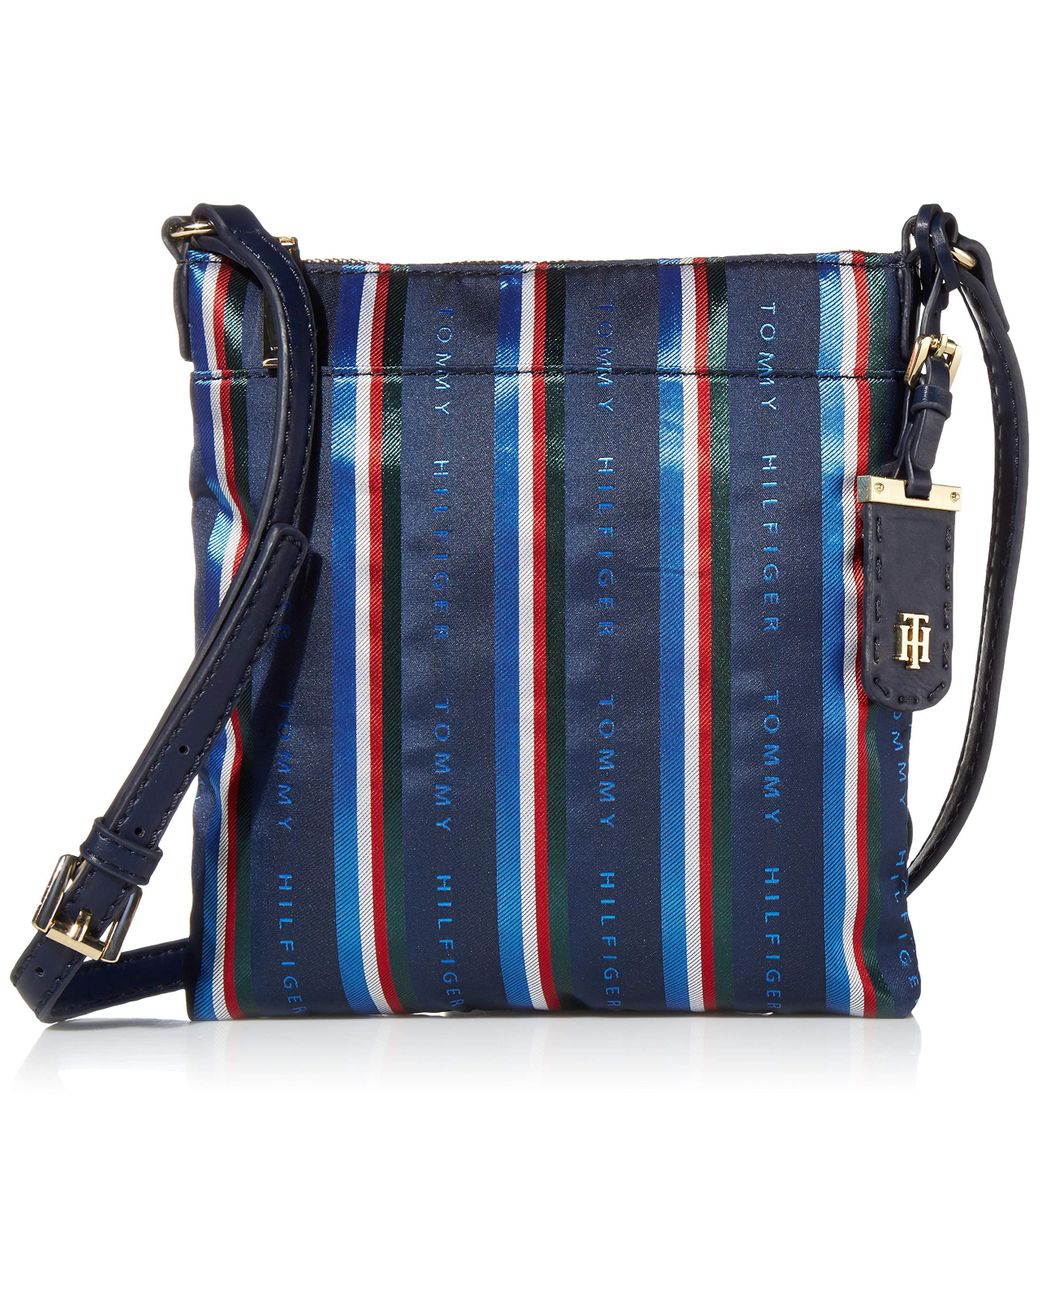 Tommy Hilfiger Crossbody Bag For Julia in Navy/ Red/ White (Blue) - Lyst